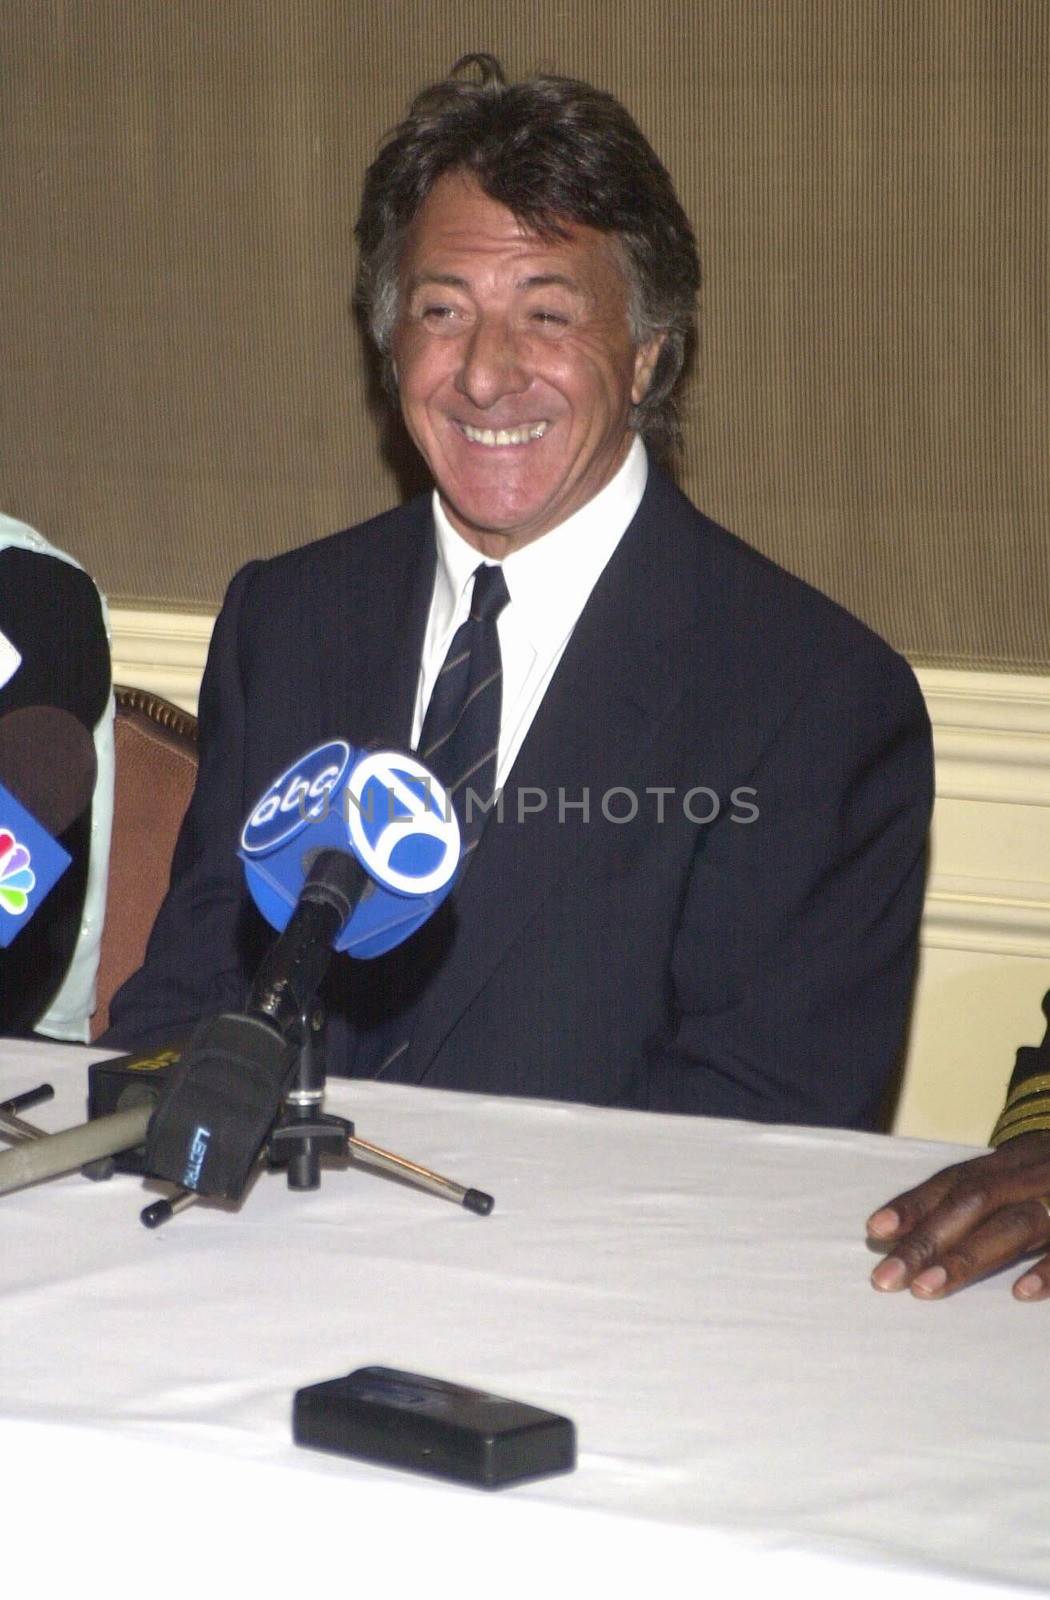 Dustin Hoffman at the "Erasing The Stigma" presentation of awards to members of the media who have provided accurate portrayals of mental illness. 04-28-00